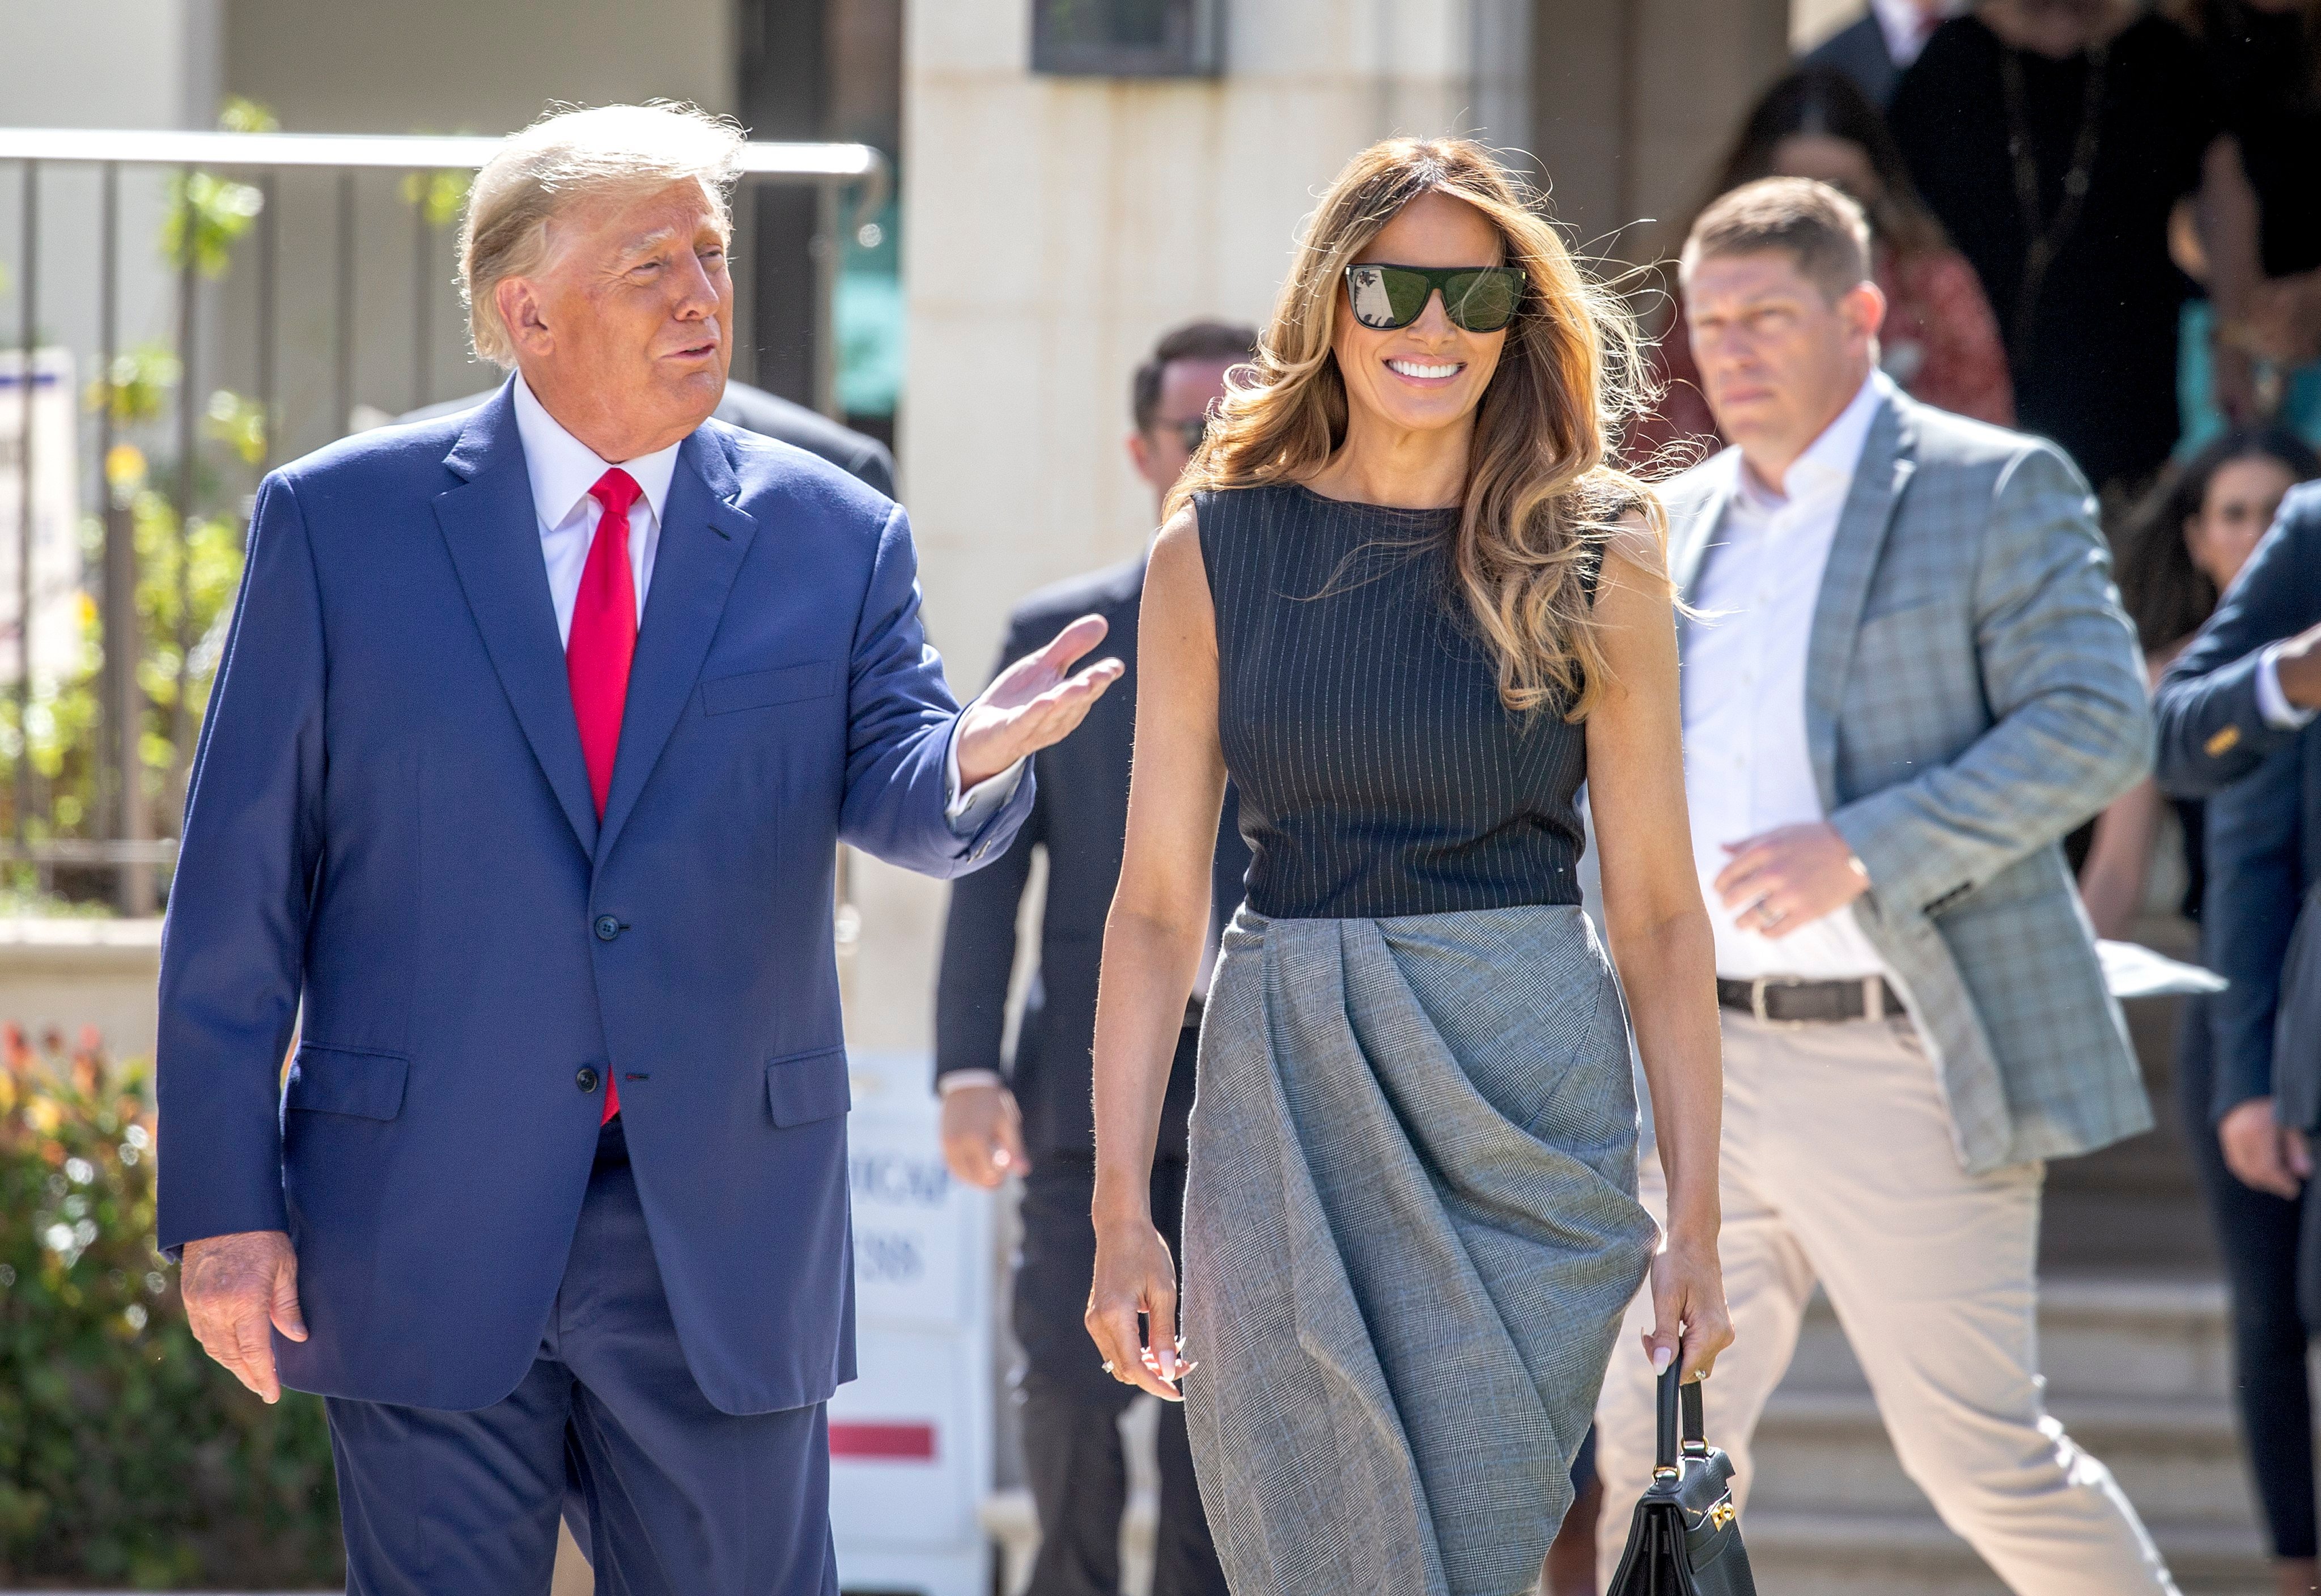 Former US President Donald Trump and former first lady Melania Trump, walk out of the electoral precinct after voting in person at the Morton and Barbara Mandel Recreation Center in Palm Beach, Florida, US, on October 8. Photo: EPA-EFE